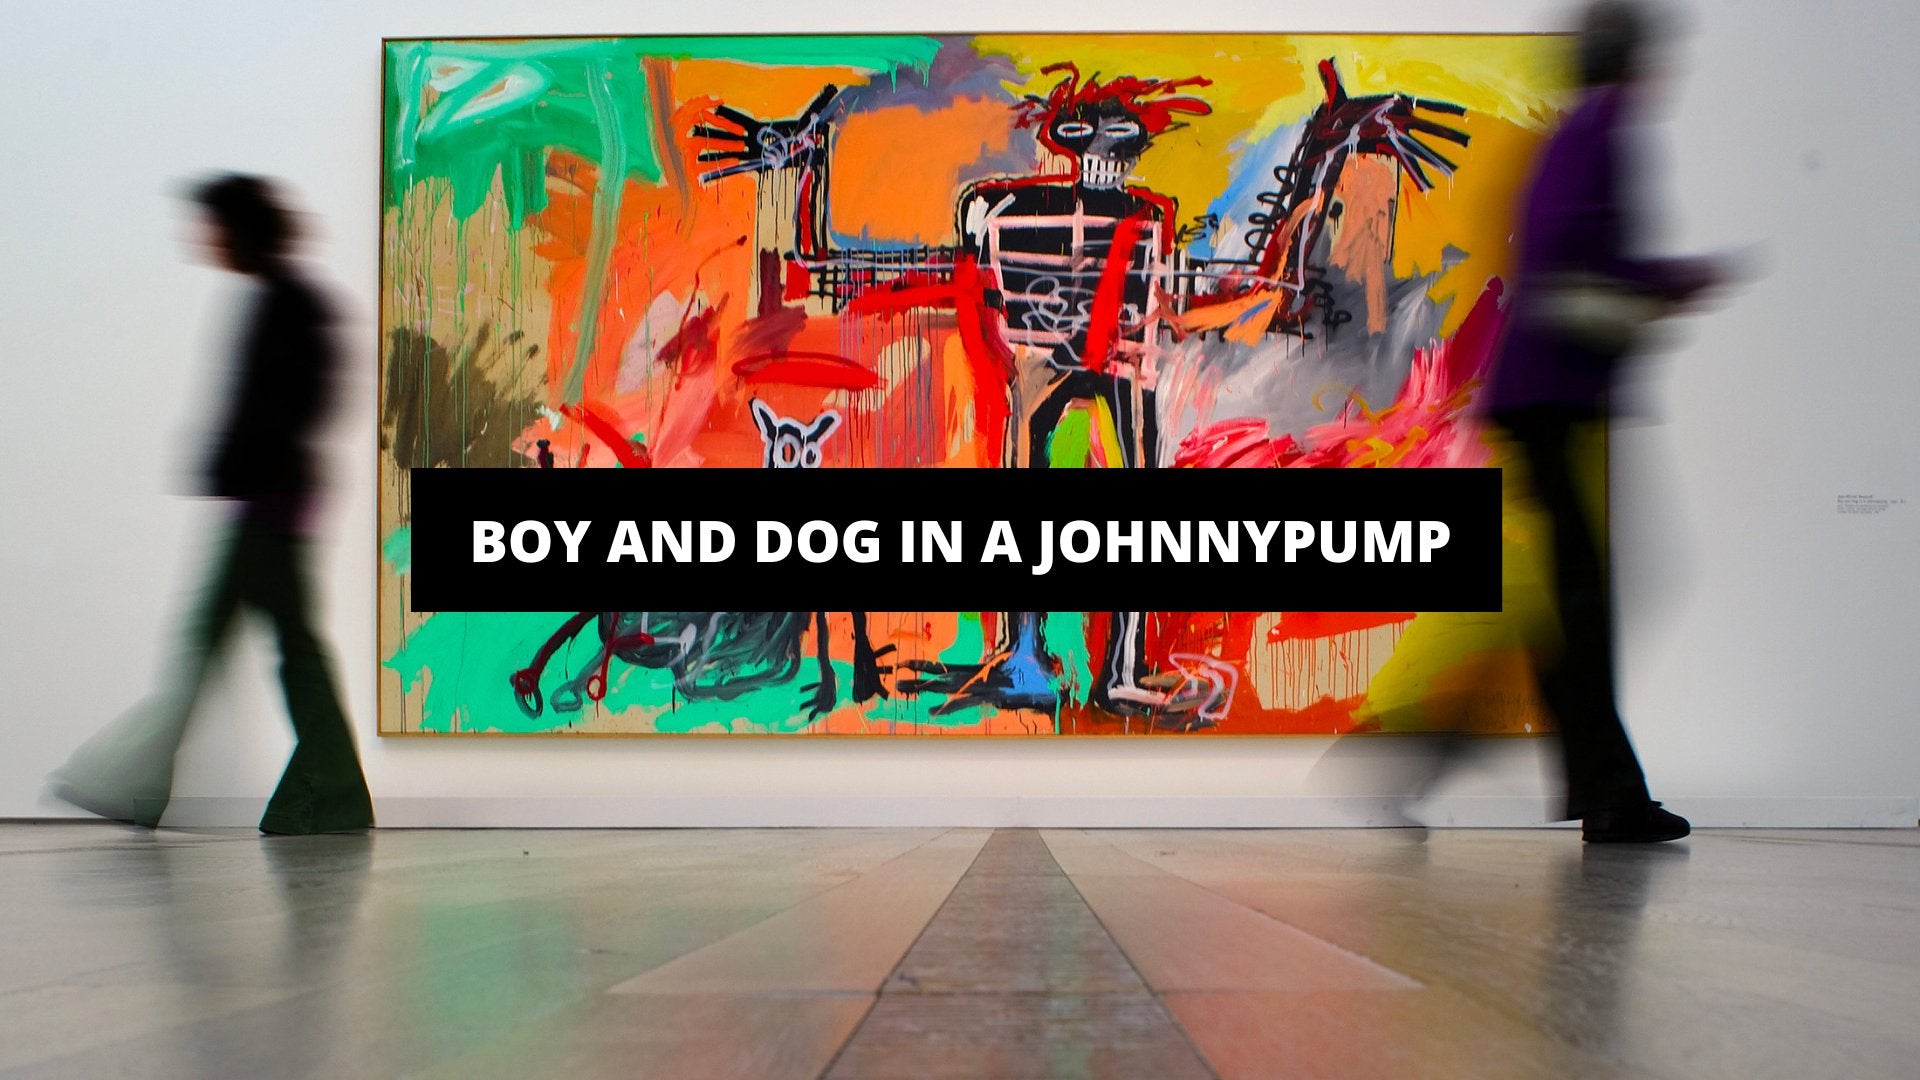 Boy And Dog In A Johnnypump - The Trendy Art